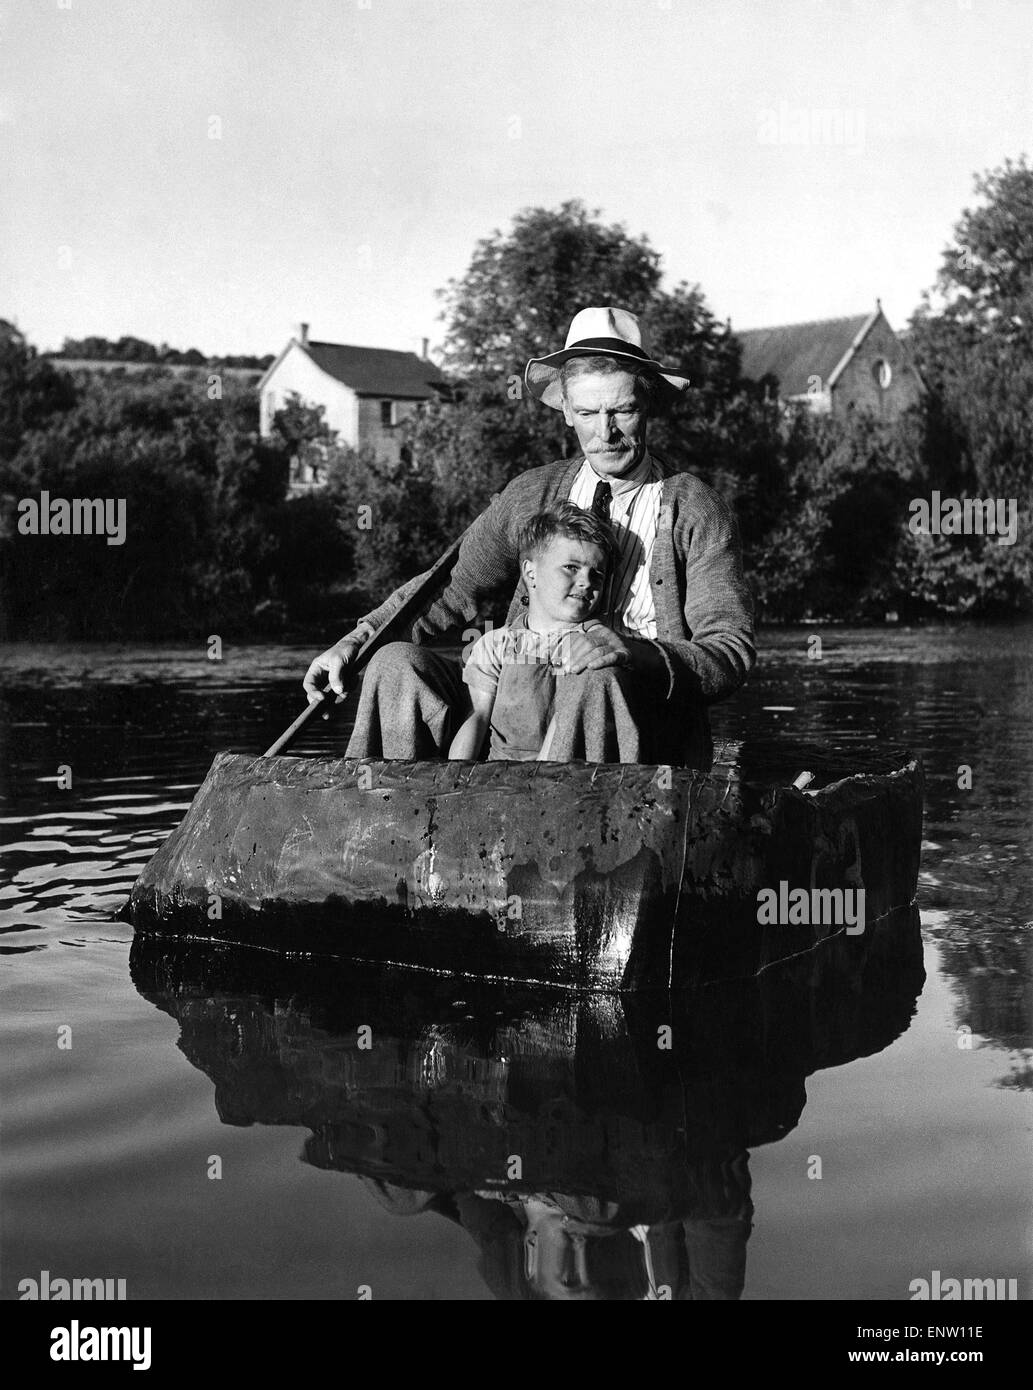 William David Owen is 72 years of age. For thirty years he's been coracle fishing. Now, as he paddles four-year-old Alan Davies across the Teify, he becomes deep in thought. His is a dying industry and young Alan must look elsewhere for work. Circa 1939 Stock Photo